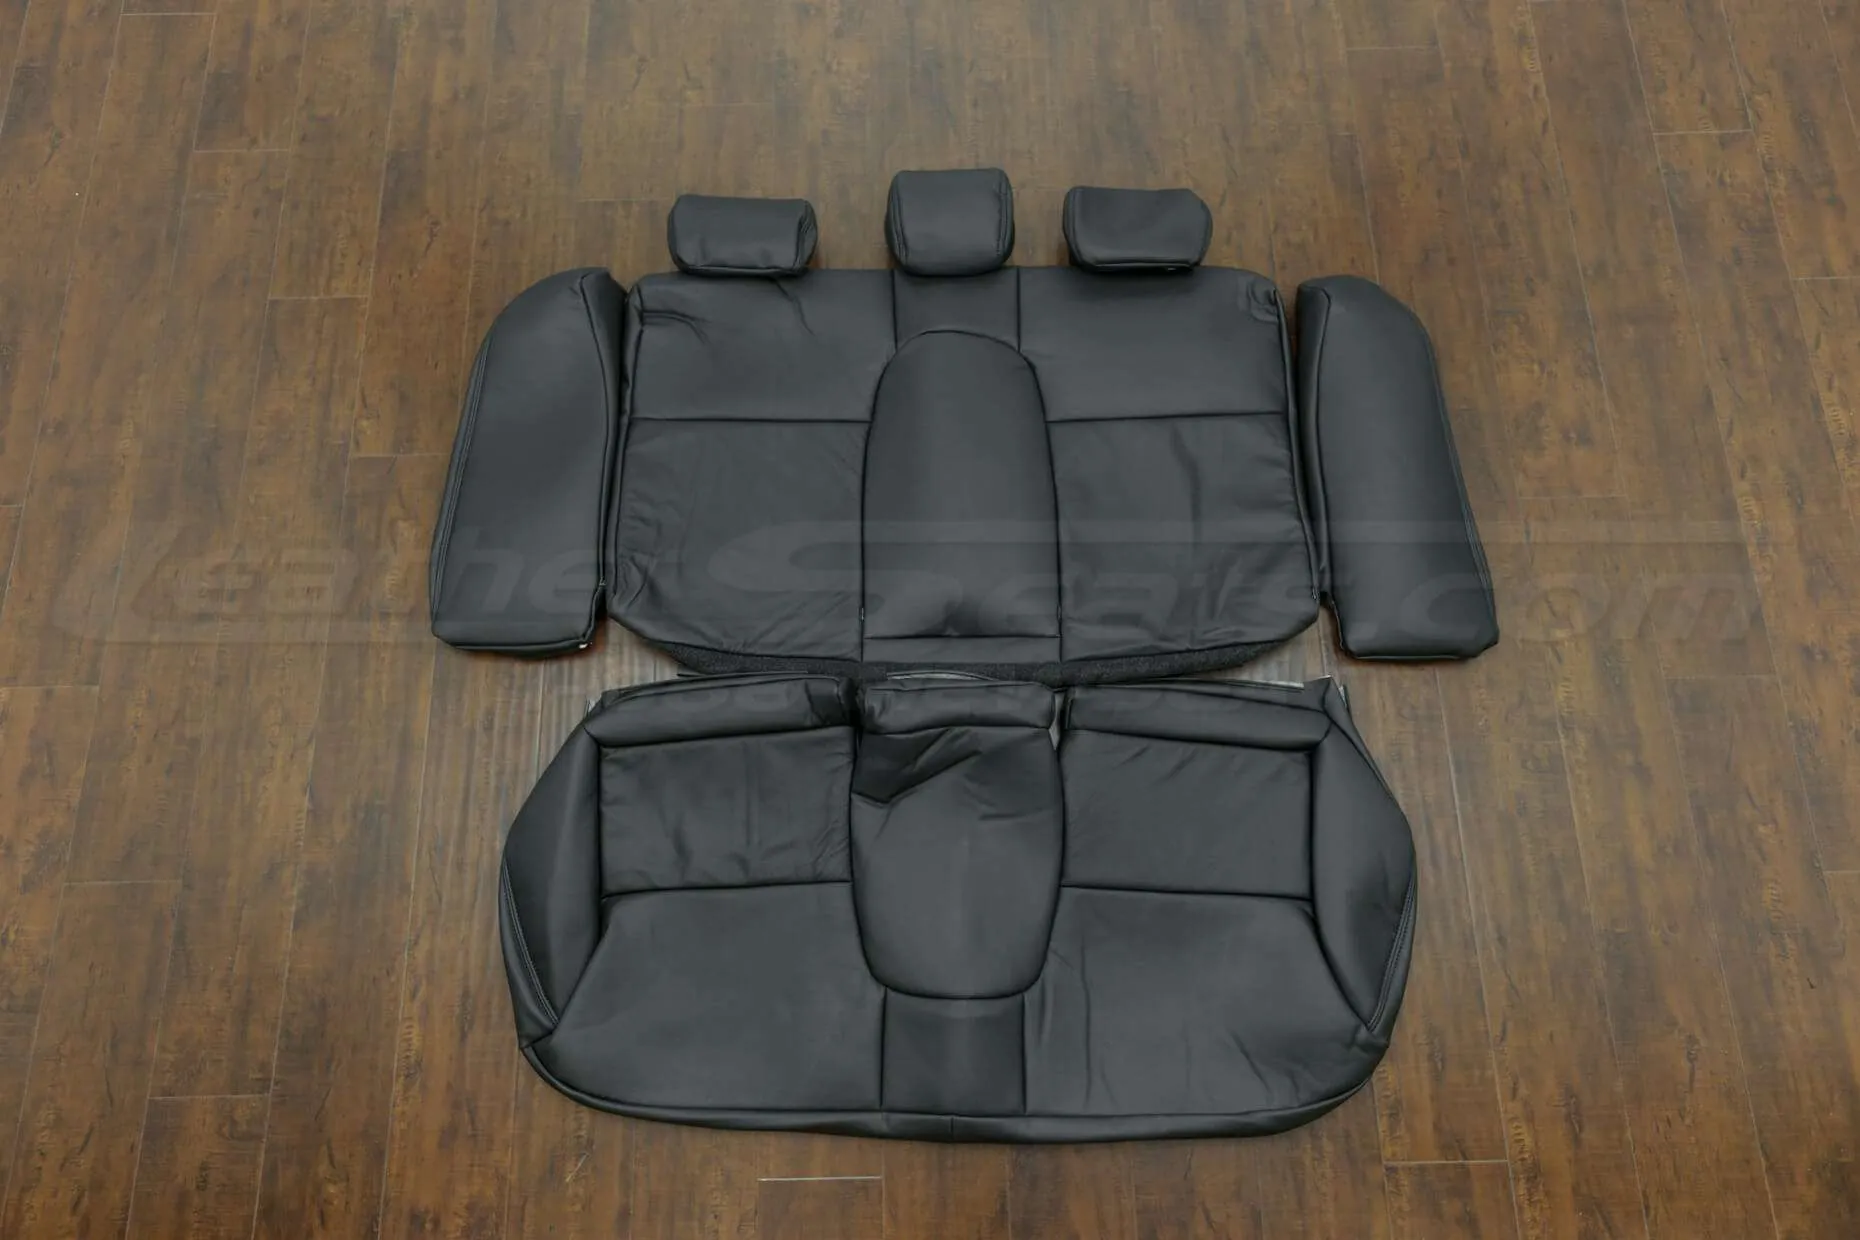 2014-2015 Honda Civic Upholstery Kit - Black - Back seats with bolsters and armrest